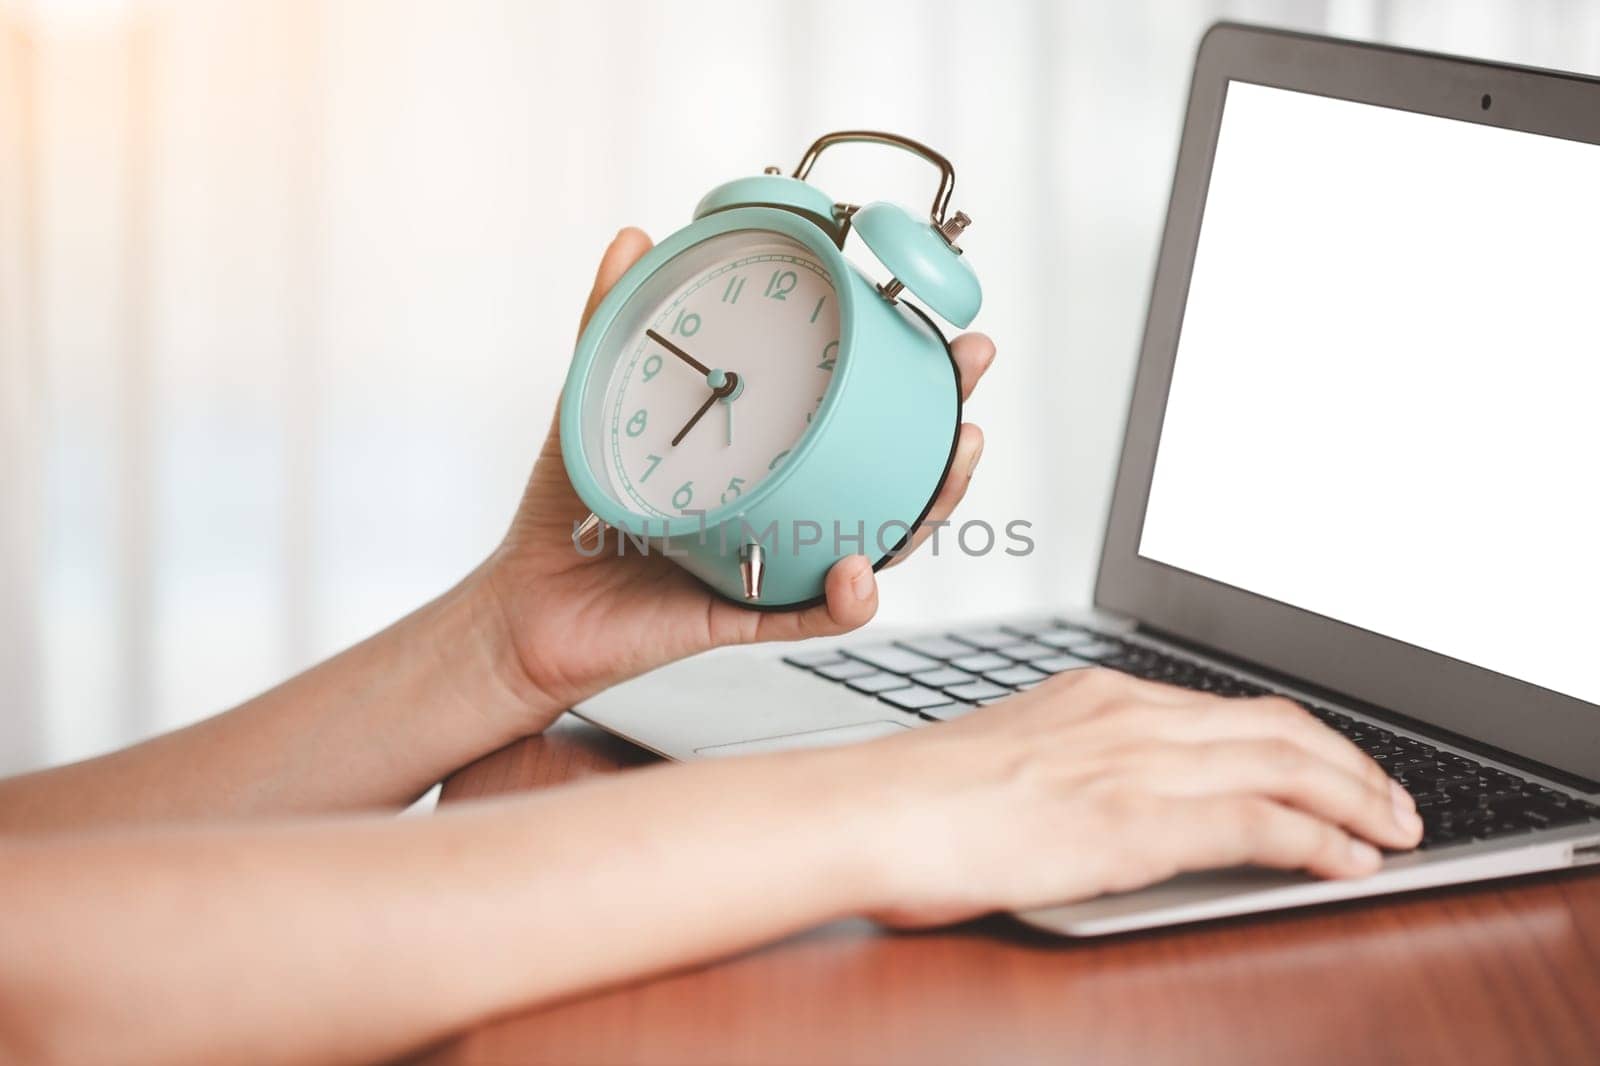 Asian woman's hand holding alarm clock to check the time on desk with a computer laptop for the concept of work, study and time management.